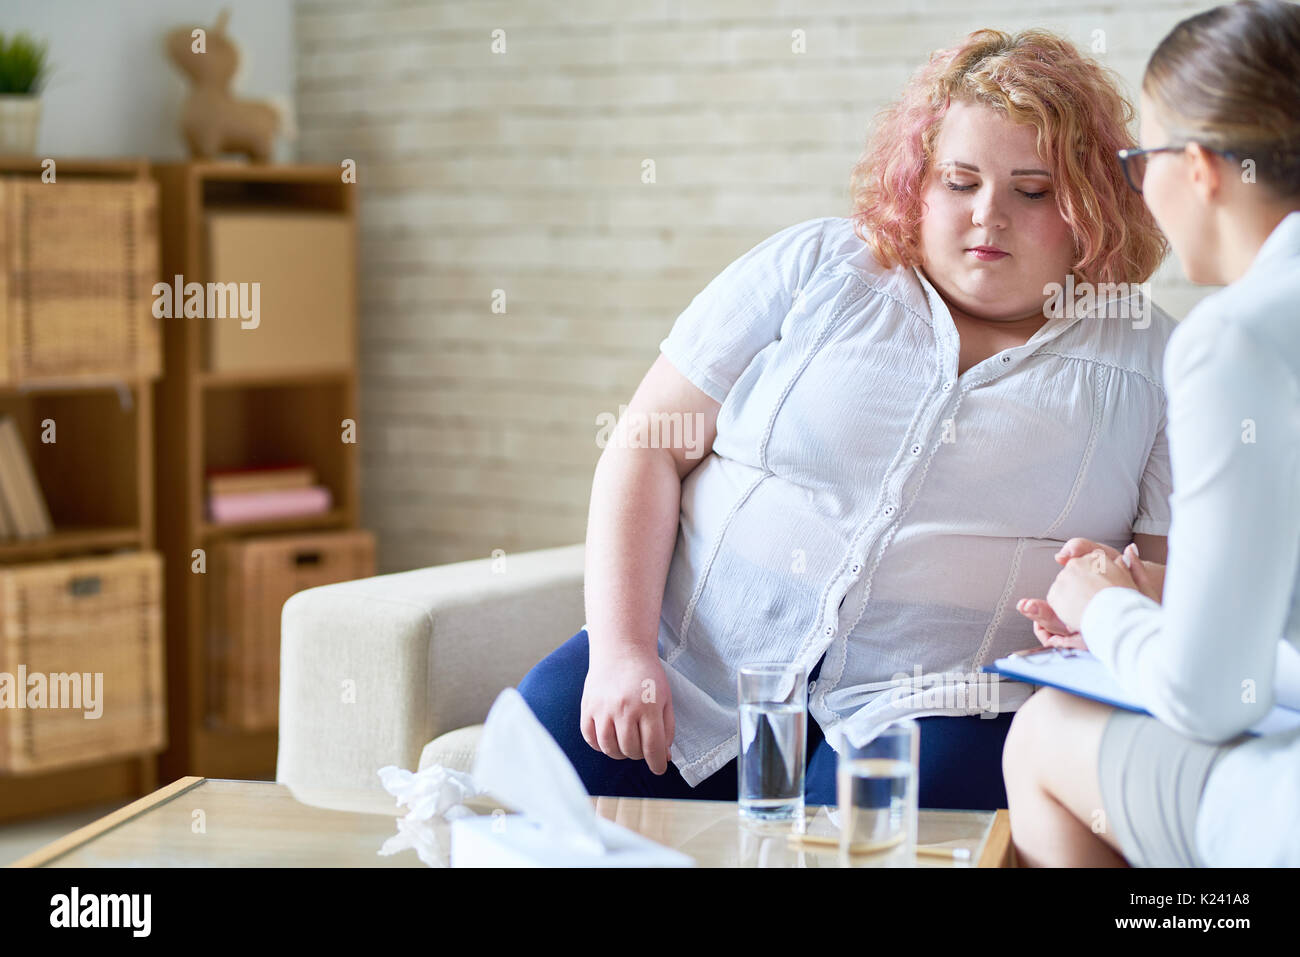 Obese Young Woman Talking to  Psychiatrist Stock Photo